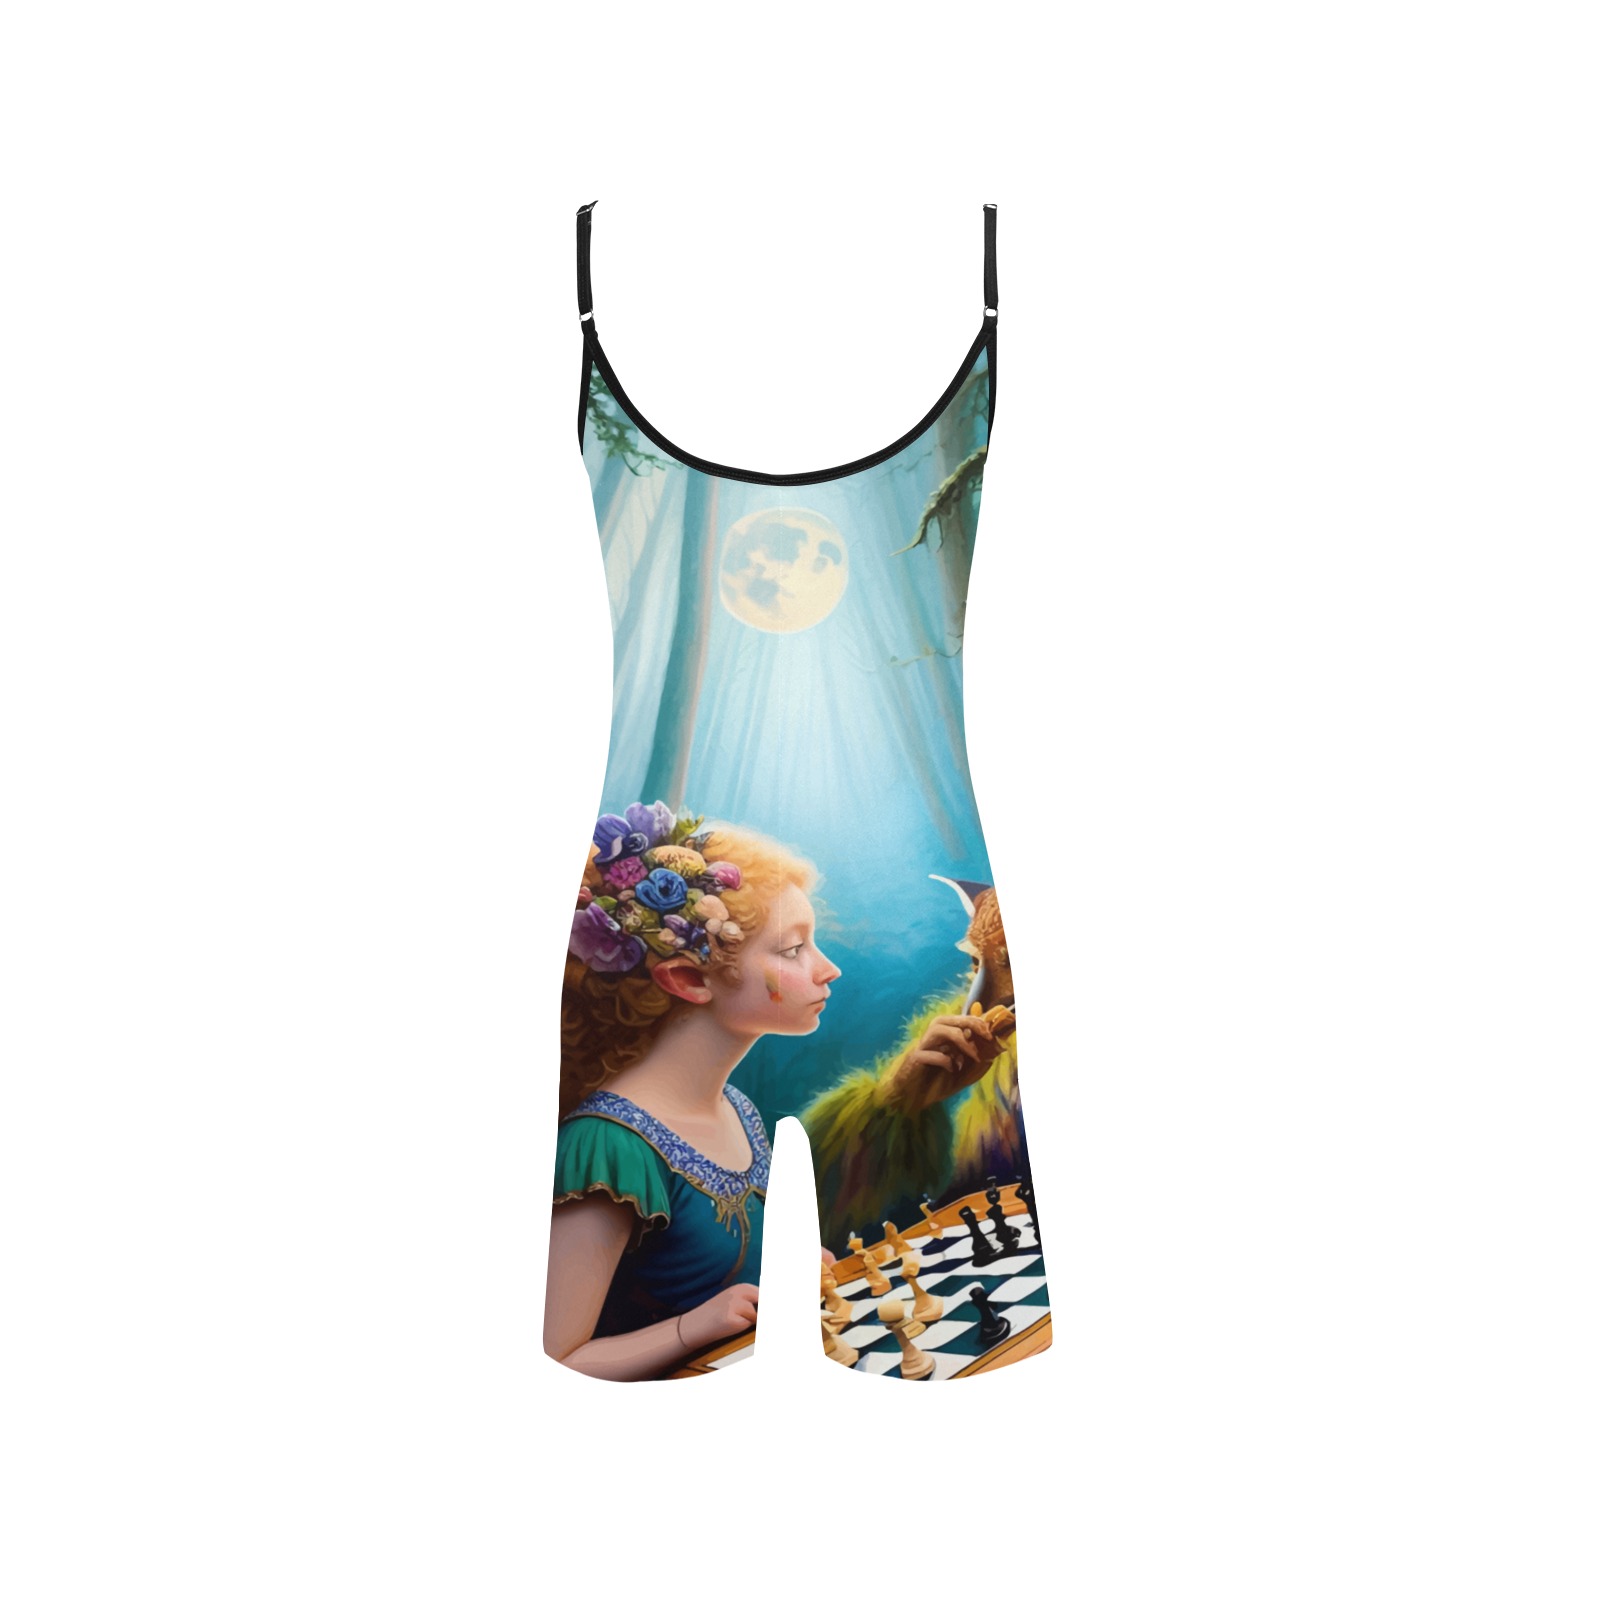 The Call of the Game 6_vectorized Women's Short Yoga Bodysuit